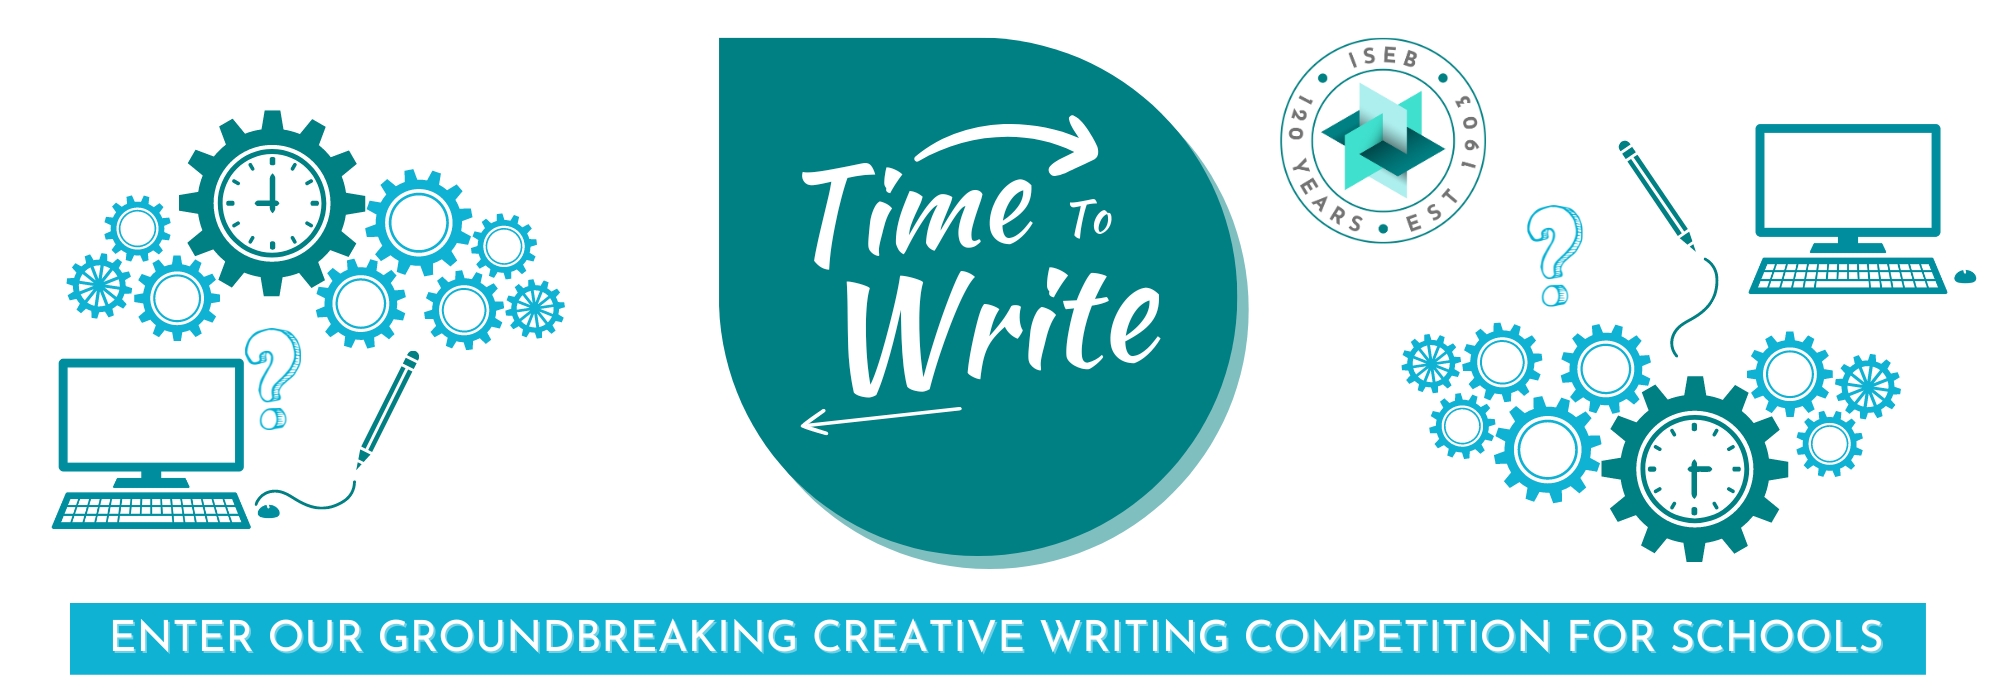 man up creative writing competition